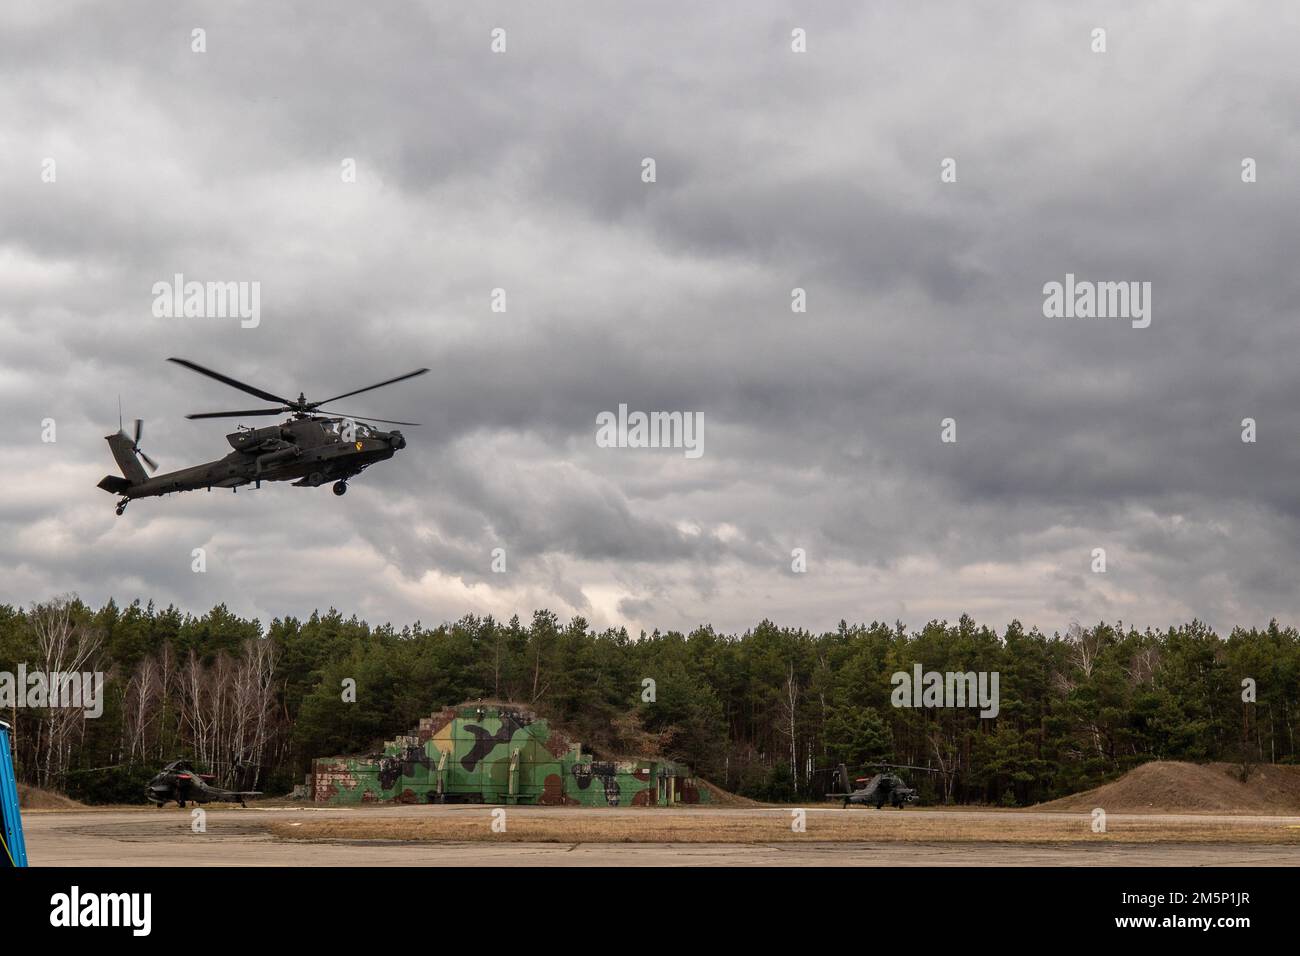 POWIDZ, Poland – 1st Air Cavalry Brigade AH64 Apache helicopter lands in Powidz, Poland, Feb. 26, 2022.     1st Air Cavalry Brigade, which is in Europe for Atlantic Resolve, moved 20 AH64 Apaches and over 400 personnel to Poland from Greece and Germany in less than 5 days to support the United States’ decision to increase its presence and activities in Poland as part of its strong and unremitting commitment to our NATO allies and partners. Stock Photo